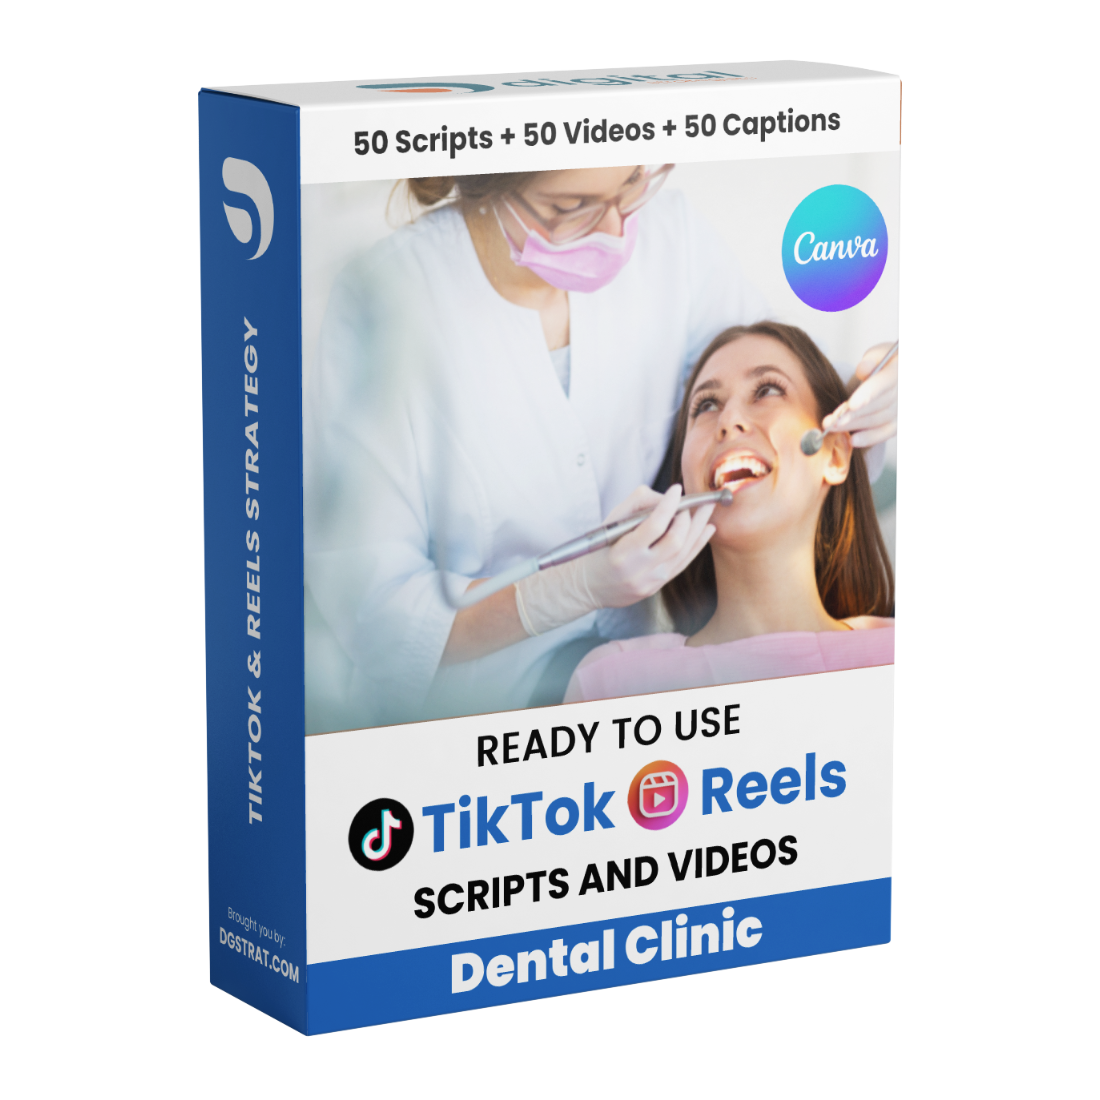 Dental Clinic - TikTok and Reels Video Content Strategy